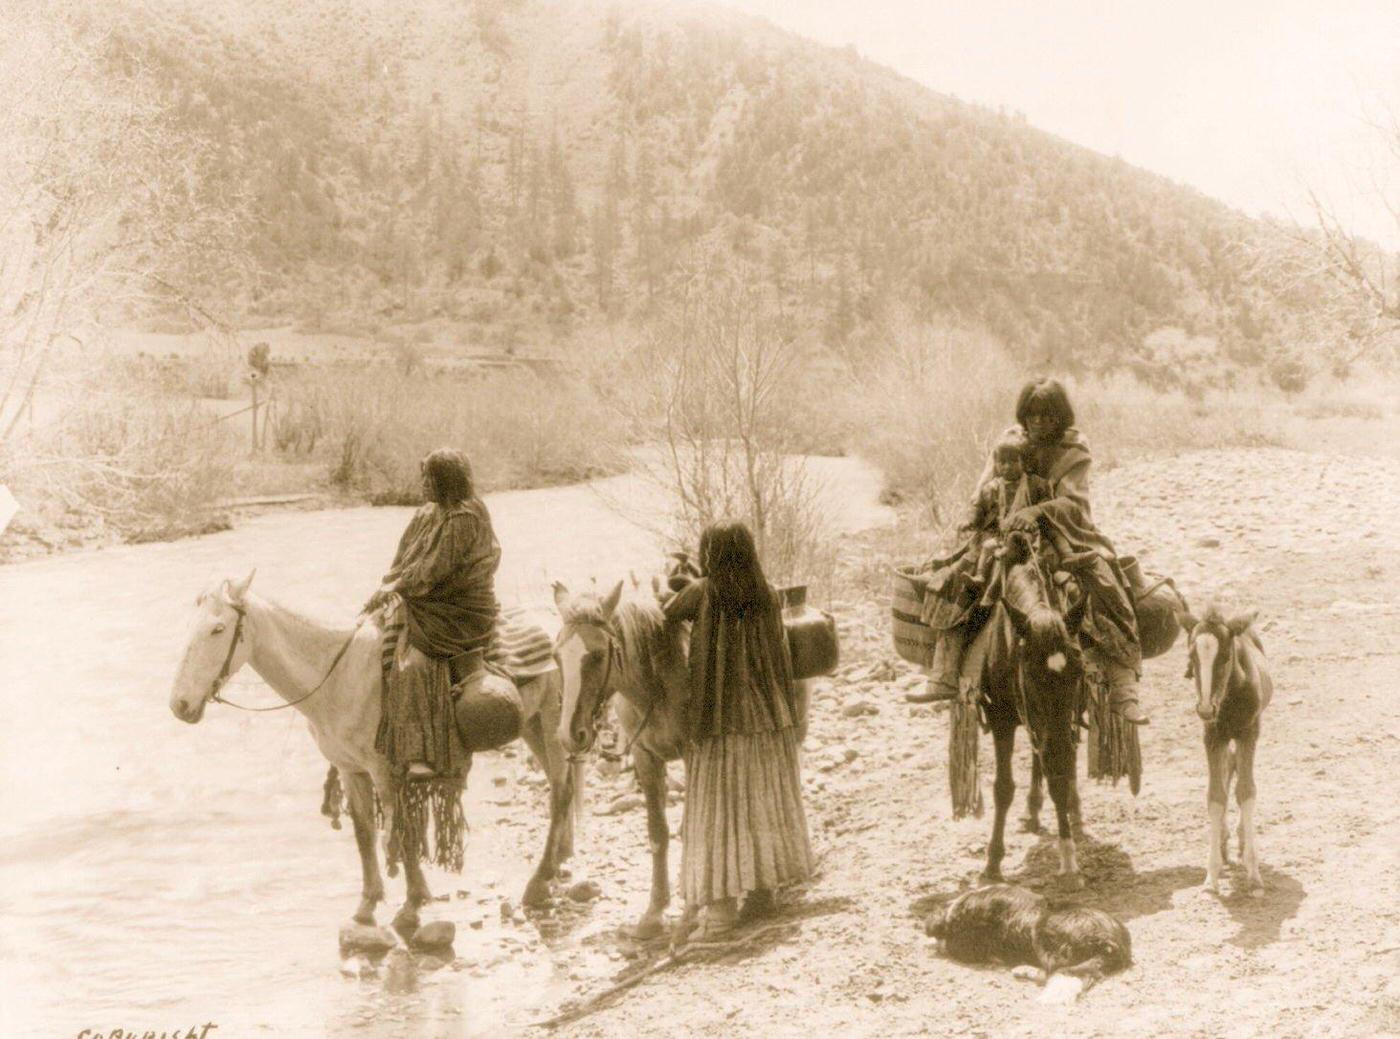 Three Apaches, one with a child, with horses laden with water jugs, a colt, and a dog stopped beside a stream, 1903